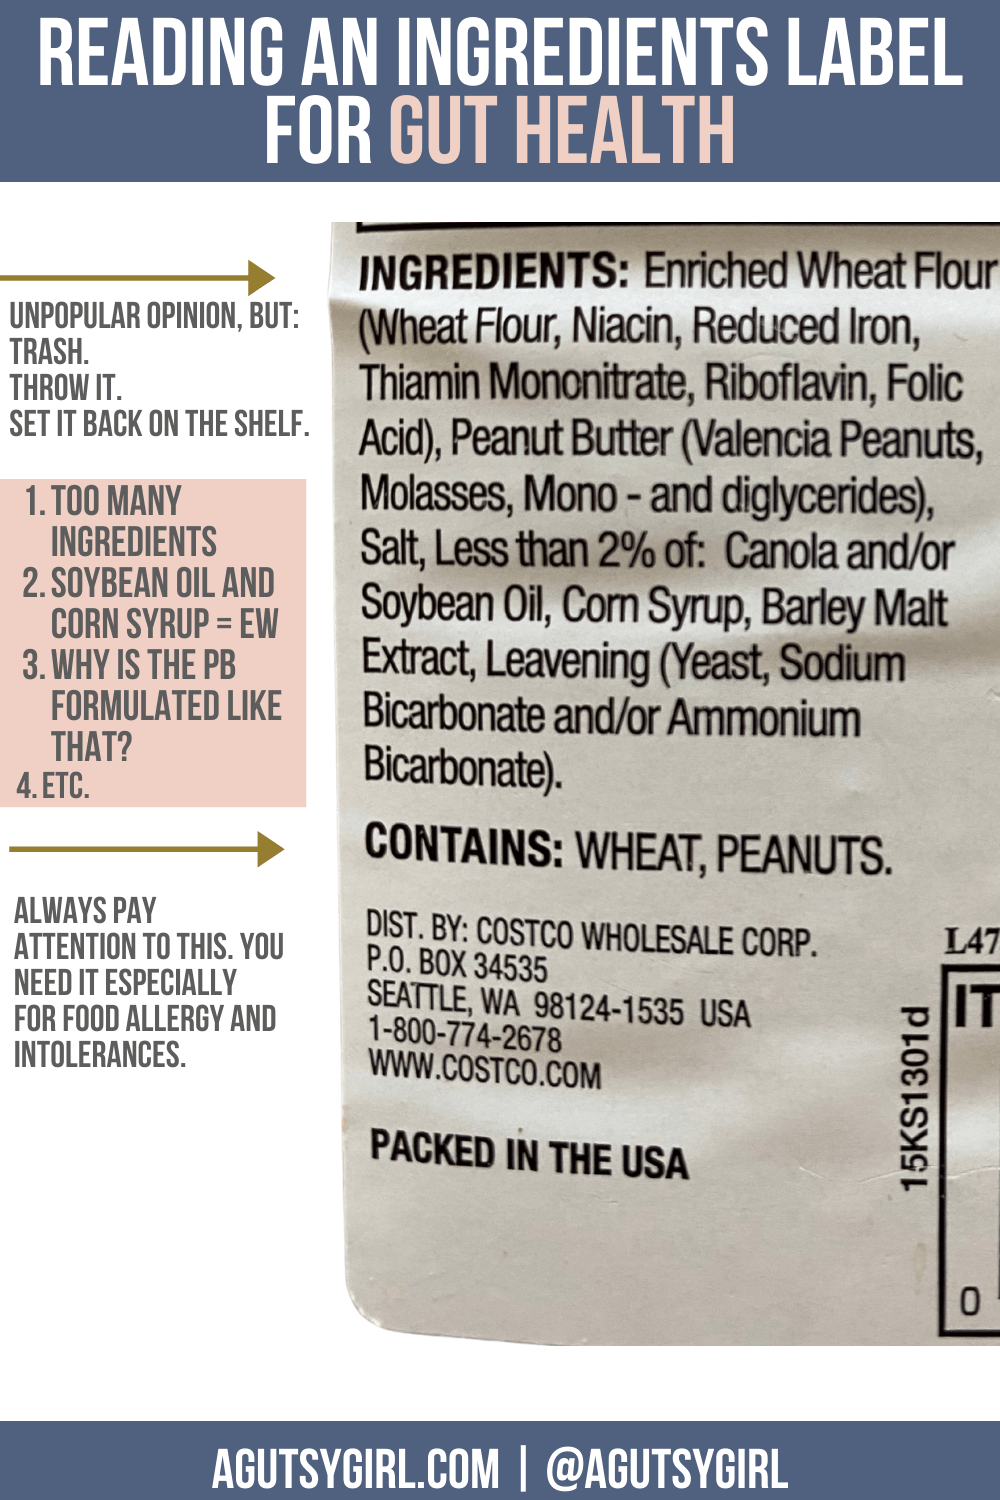 Ingredient List How to Read Food Labels template for Gut Health agutsygirl.com #foodlabel #nutritionlabel #guthealth